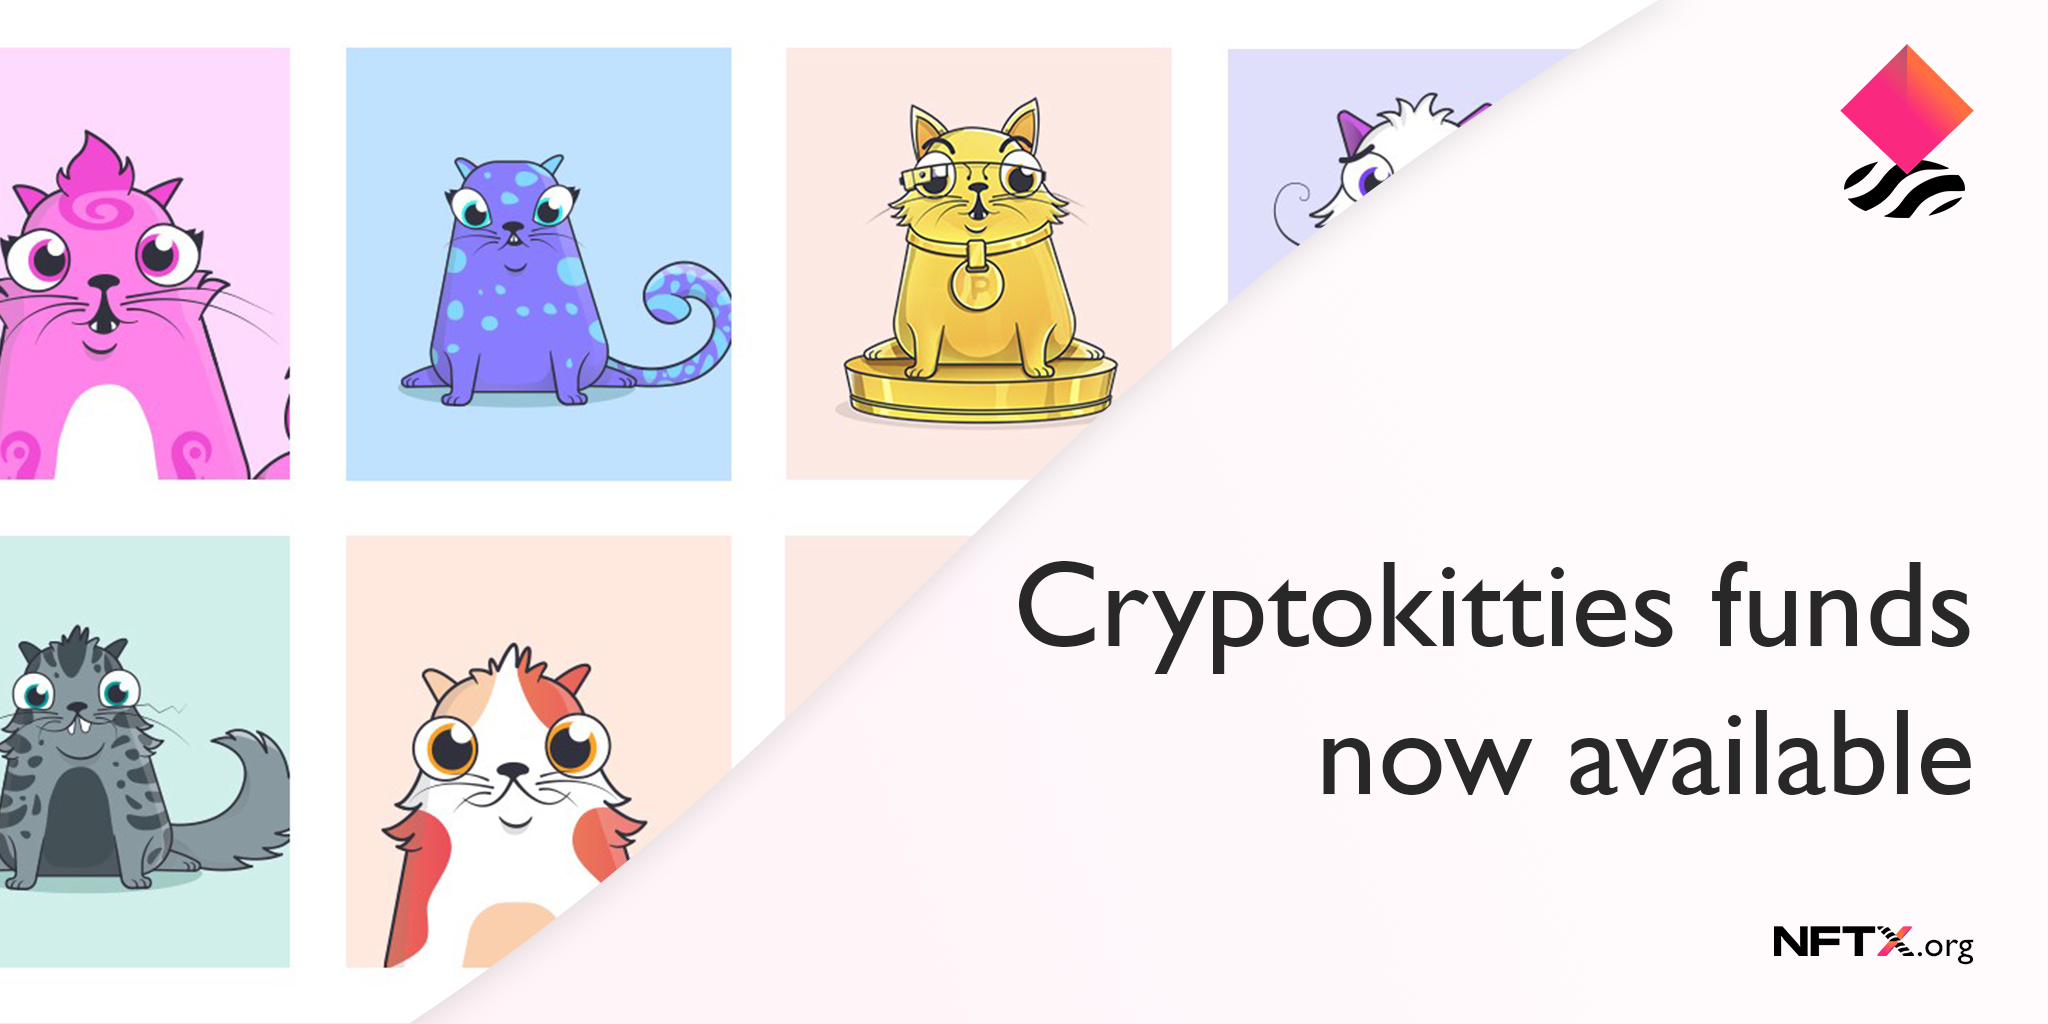 CryptoKitties Index funds are now available